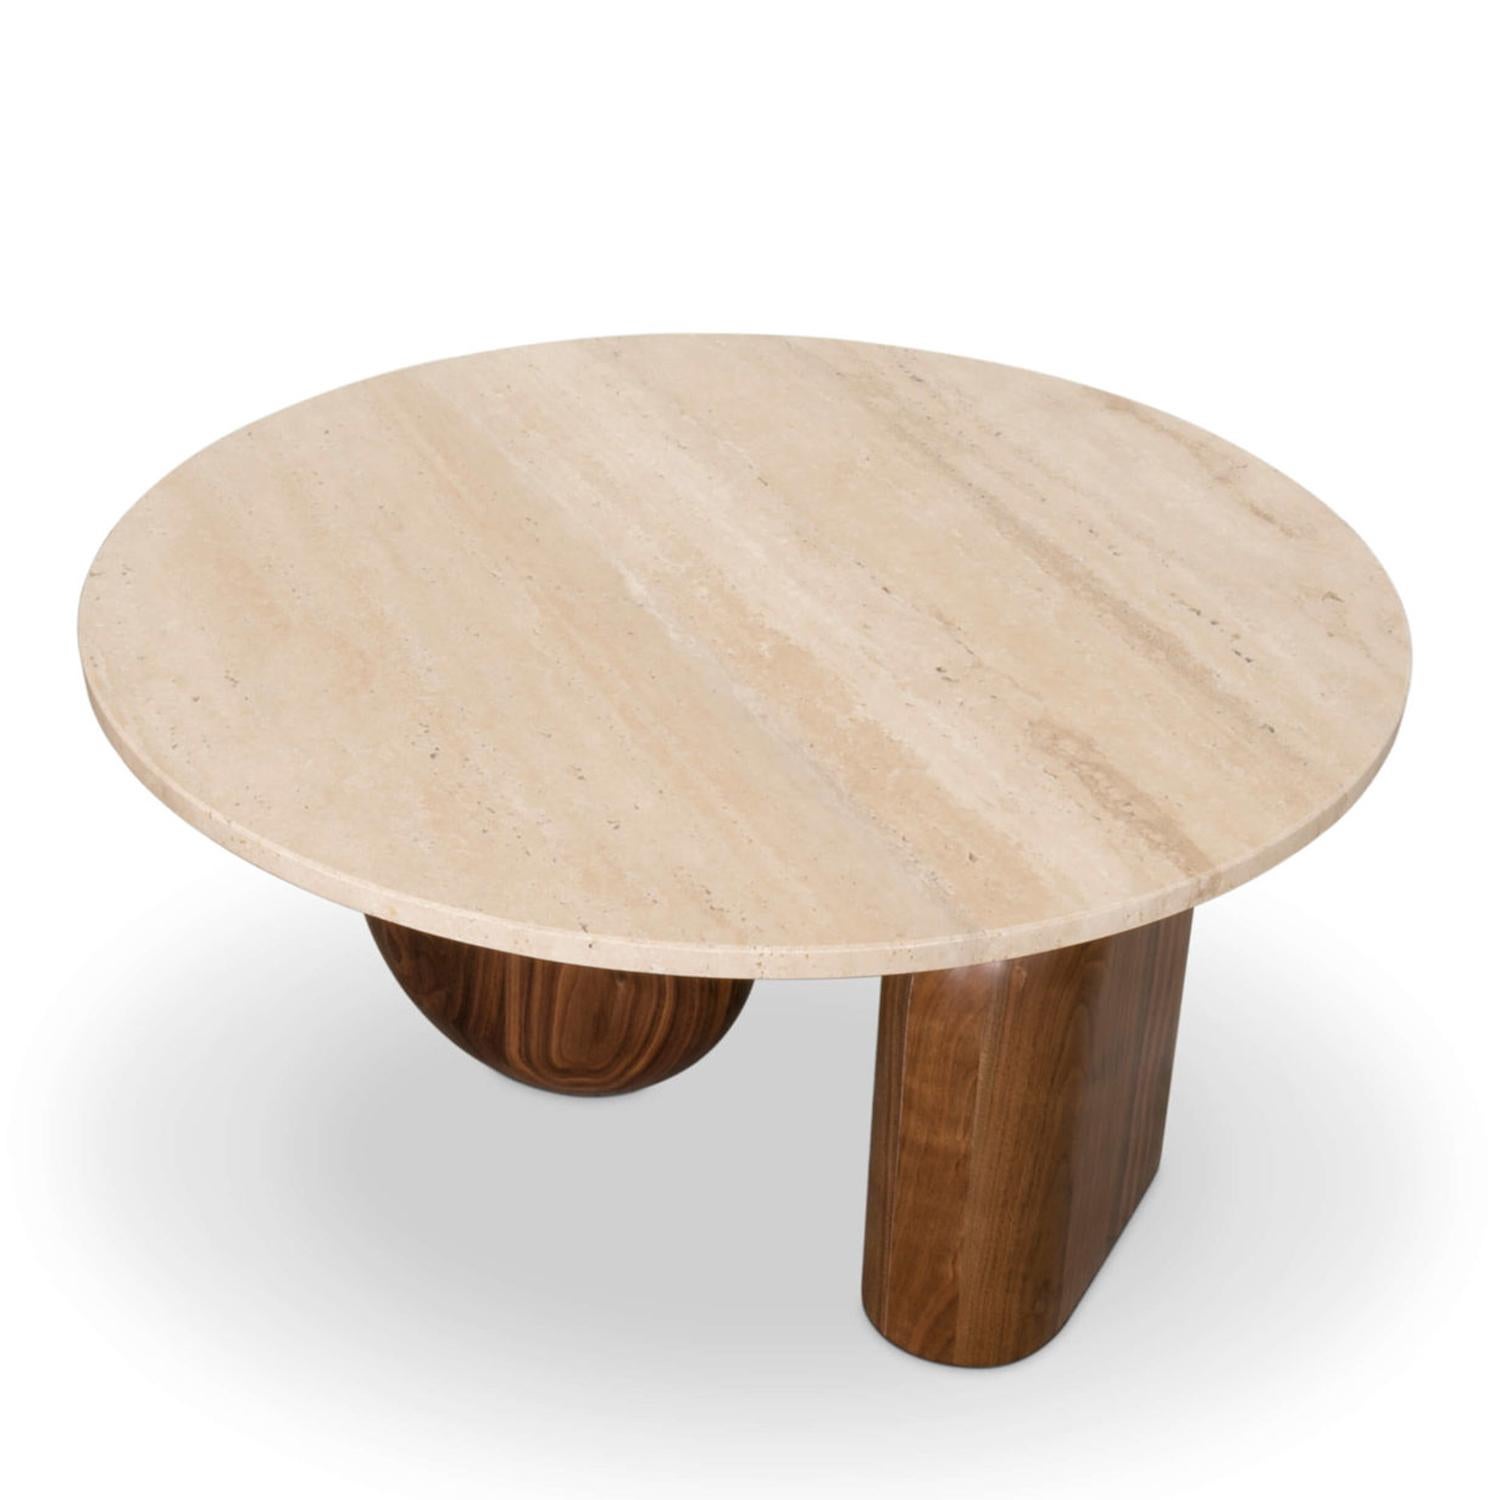 Coffee table Tessa round with solid walnut
wood bases and with travertine table top.